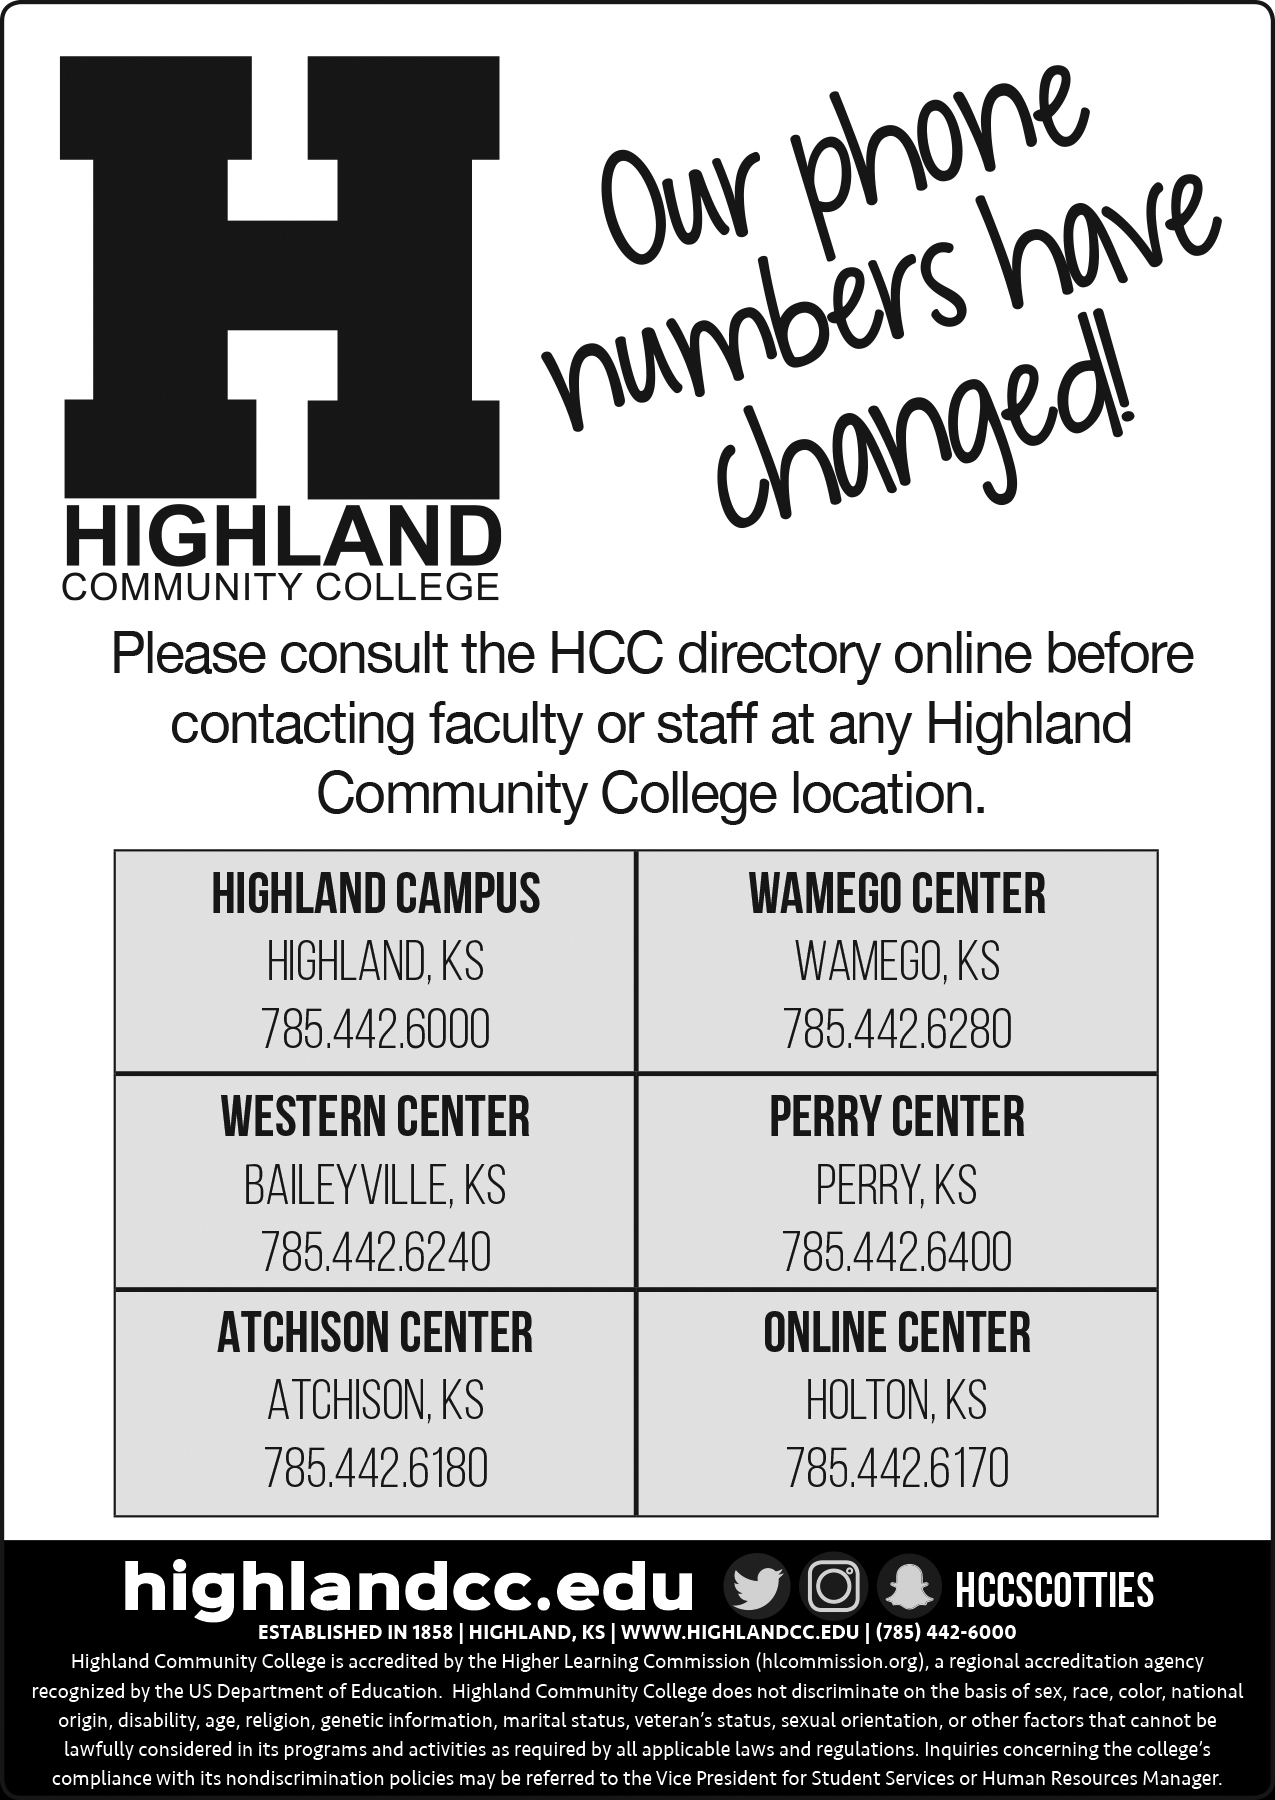 Phone Number Change at All Highland Community College Locations